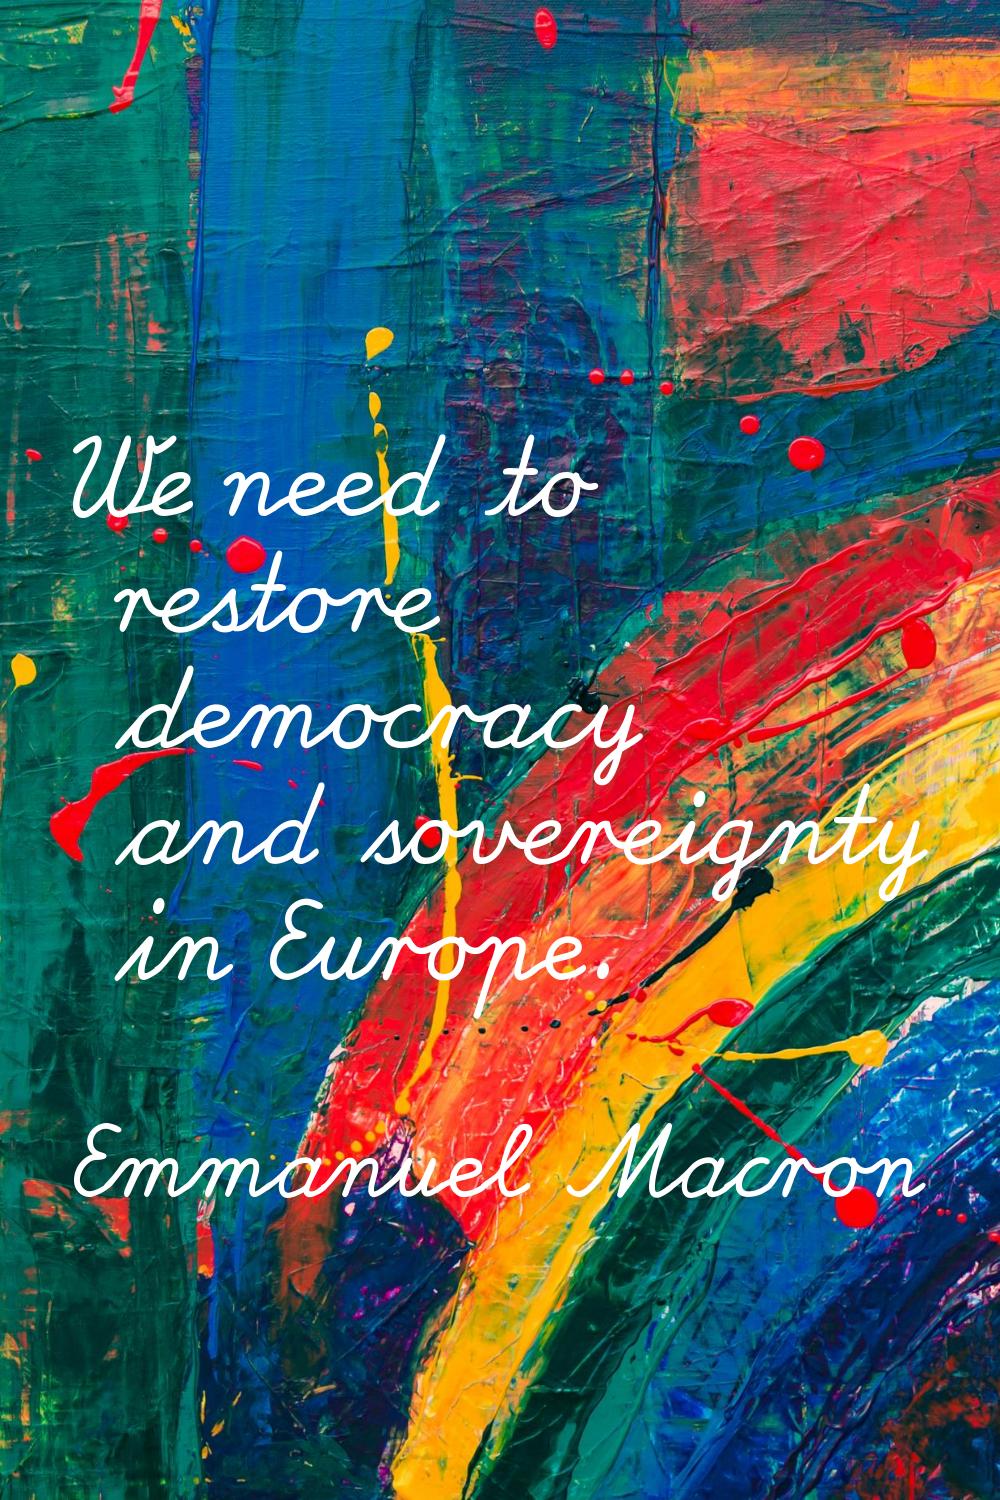 We need to restore democracy and sovereignty in Europe.